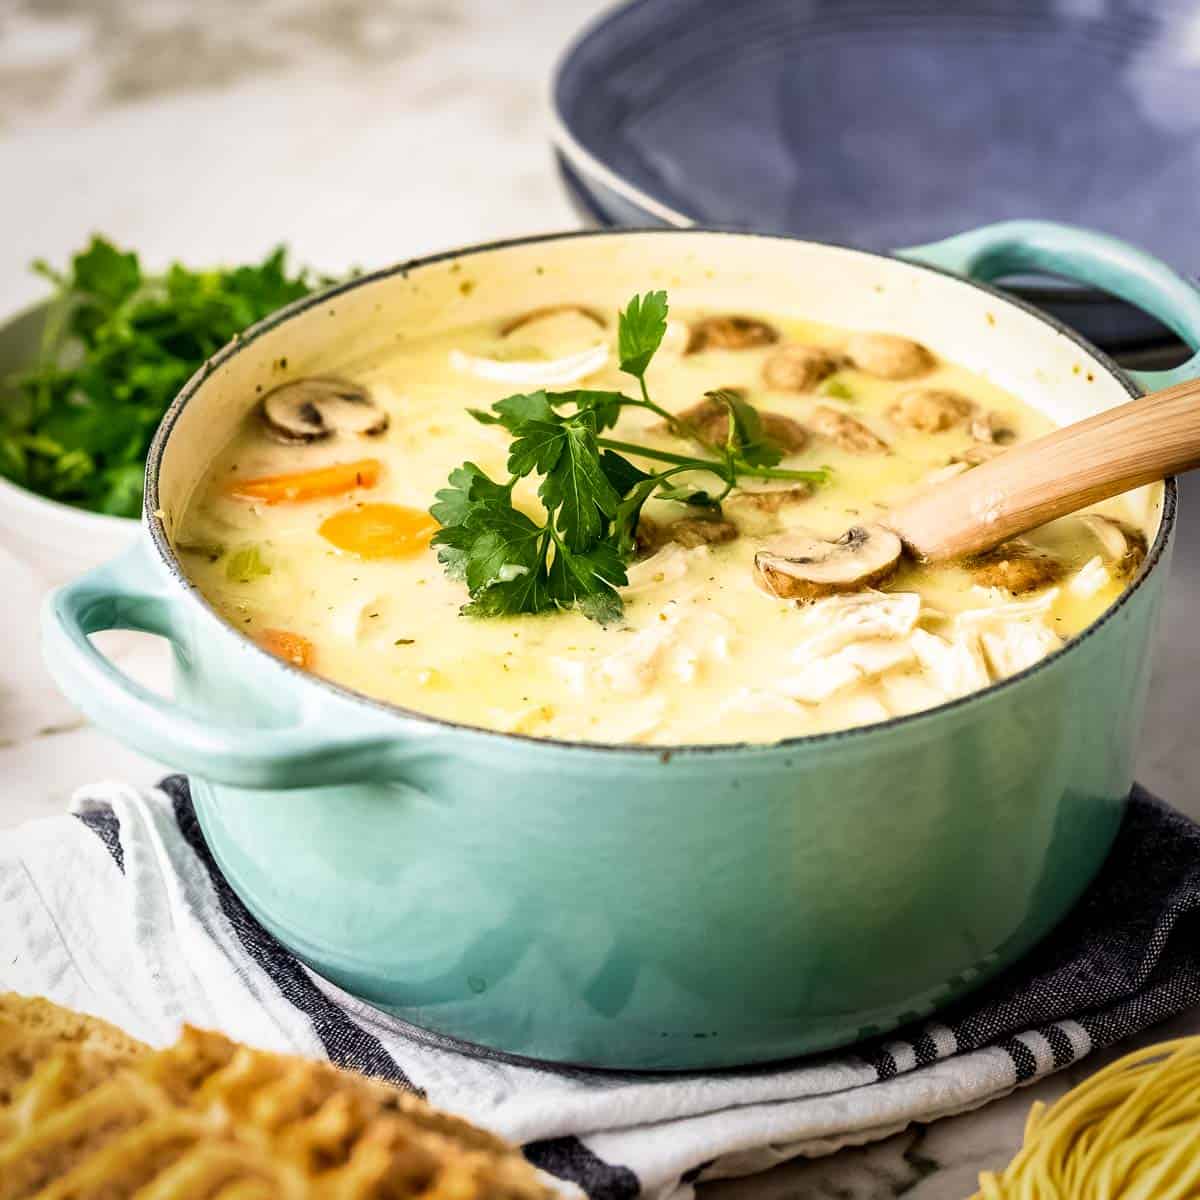 Side shot of a large teal colored pot filled with turkey noodle soup garnished with fresh parsley on a dark blue and white cloth with a wooden spoon leaning on the edge and a bowl of parsley in the background.